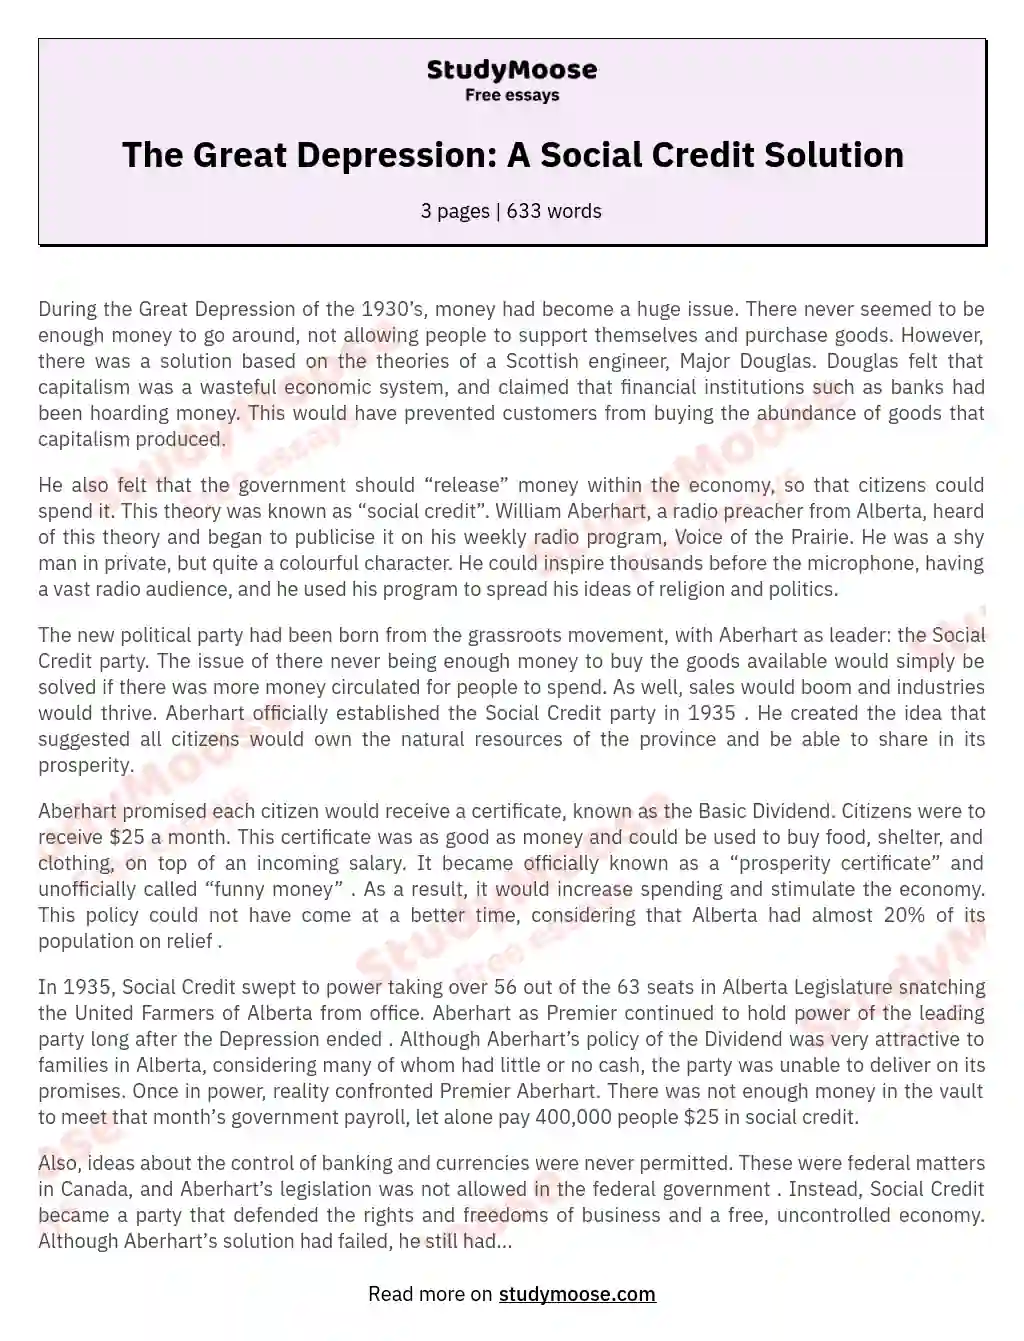 The Great Depression: A Social Credit Solution essay